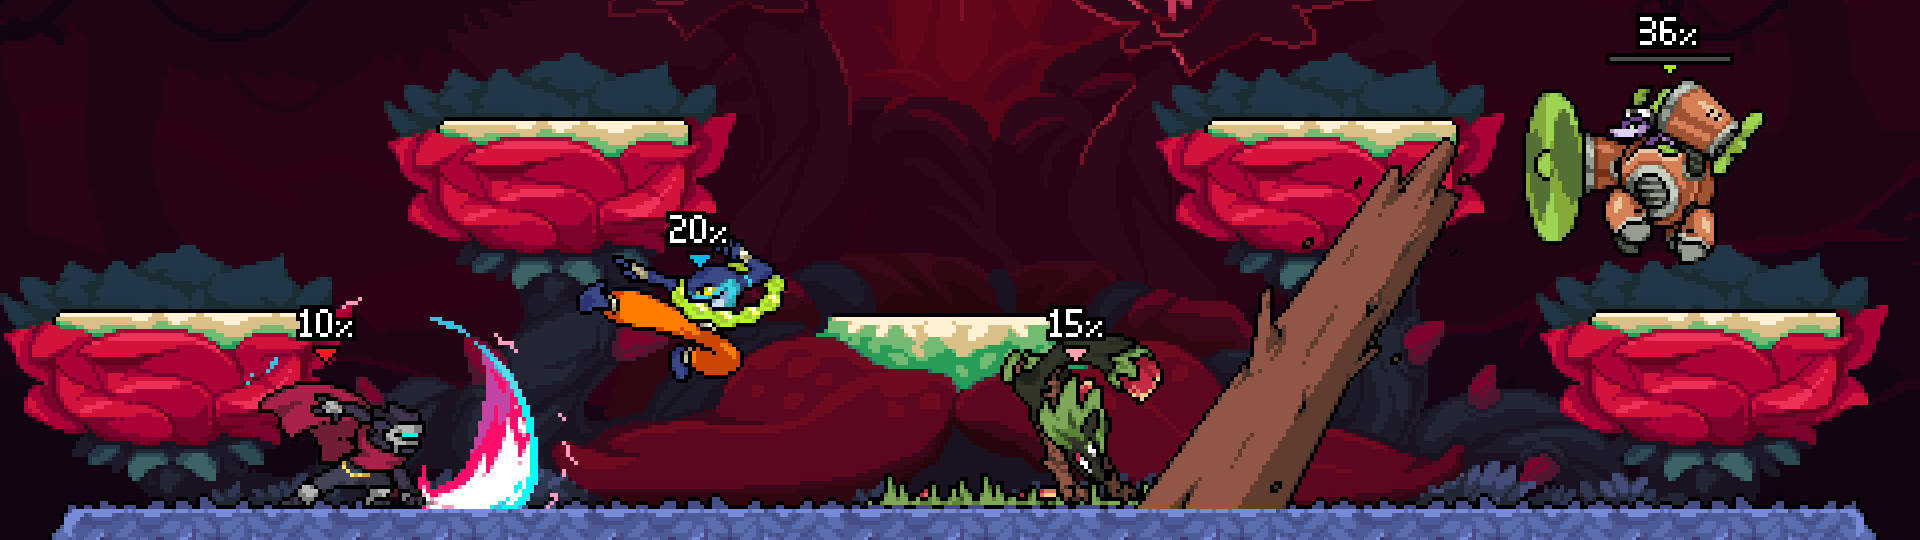 Rivals of Aether Rollback Netcode Open Beta slice